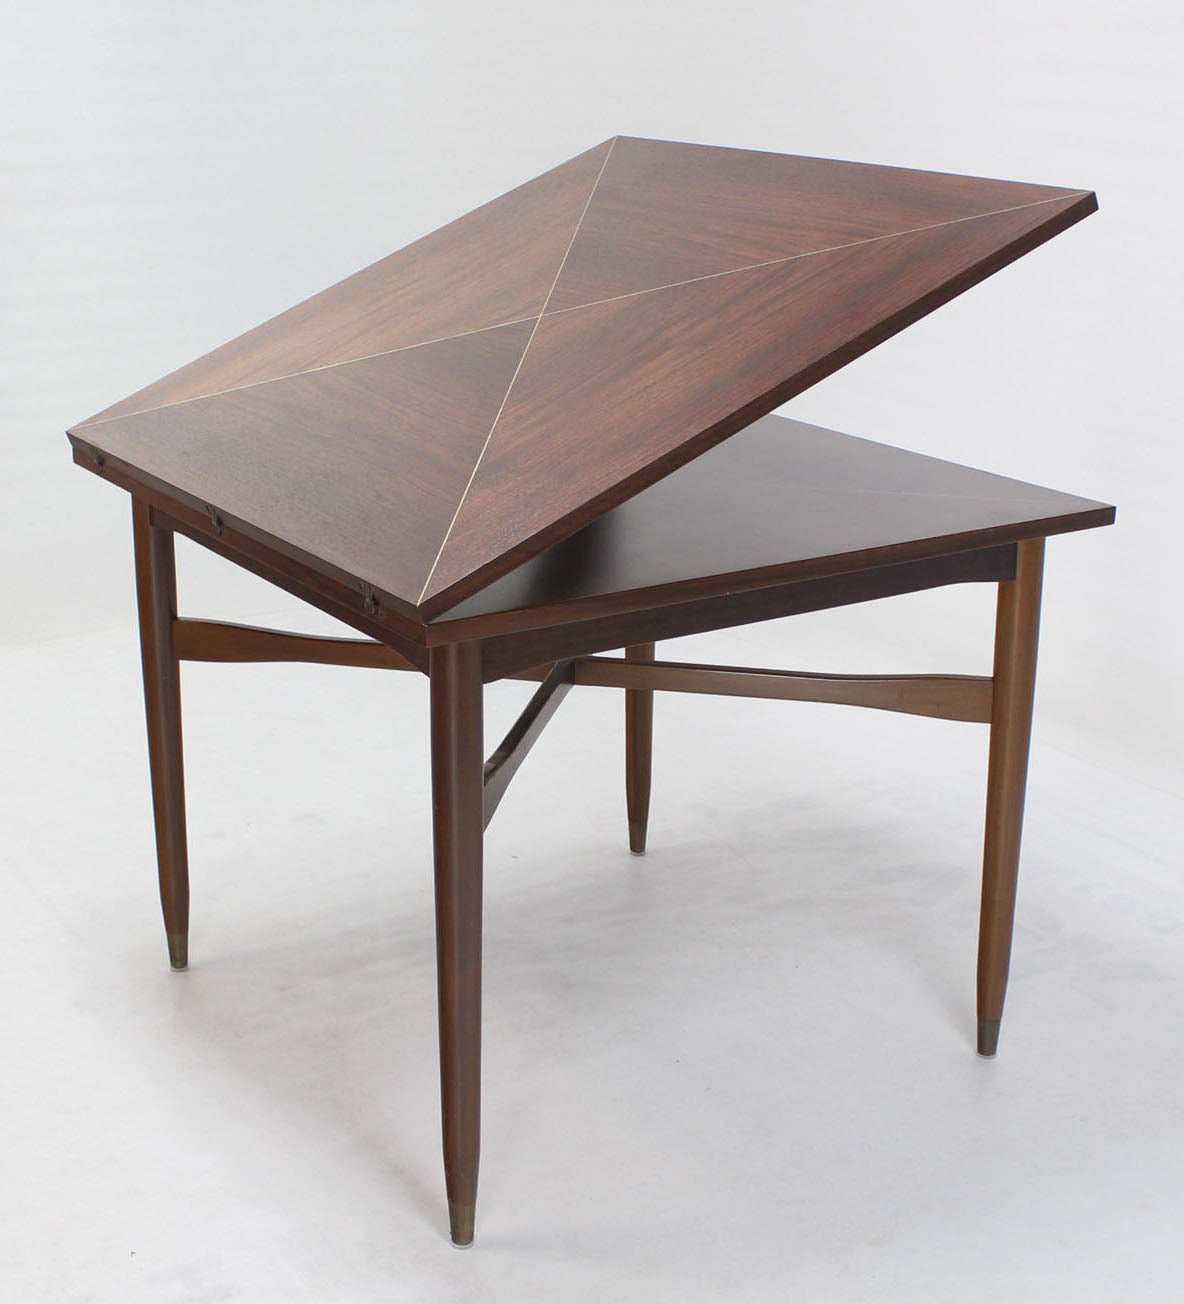 Walnut-Top with Brass Inlay, Mid-Century Modern Expandable Game Table 1